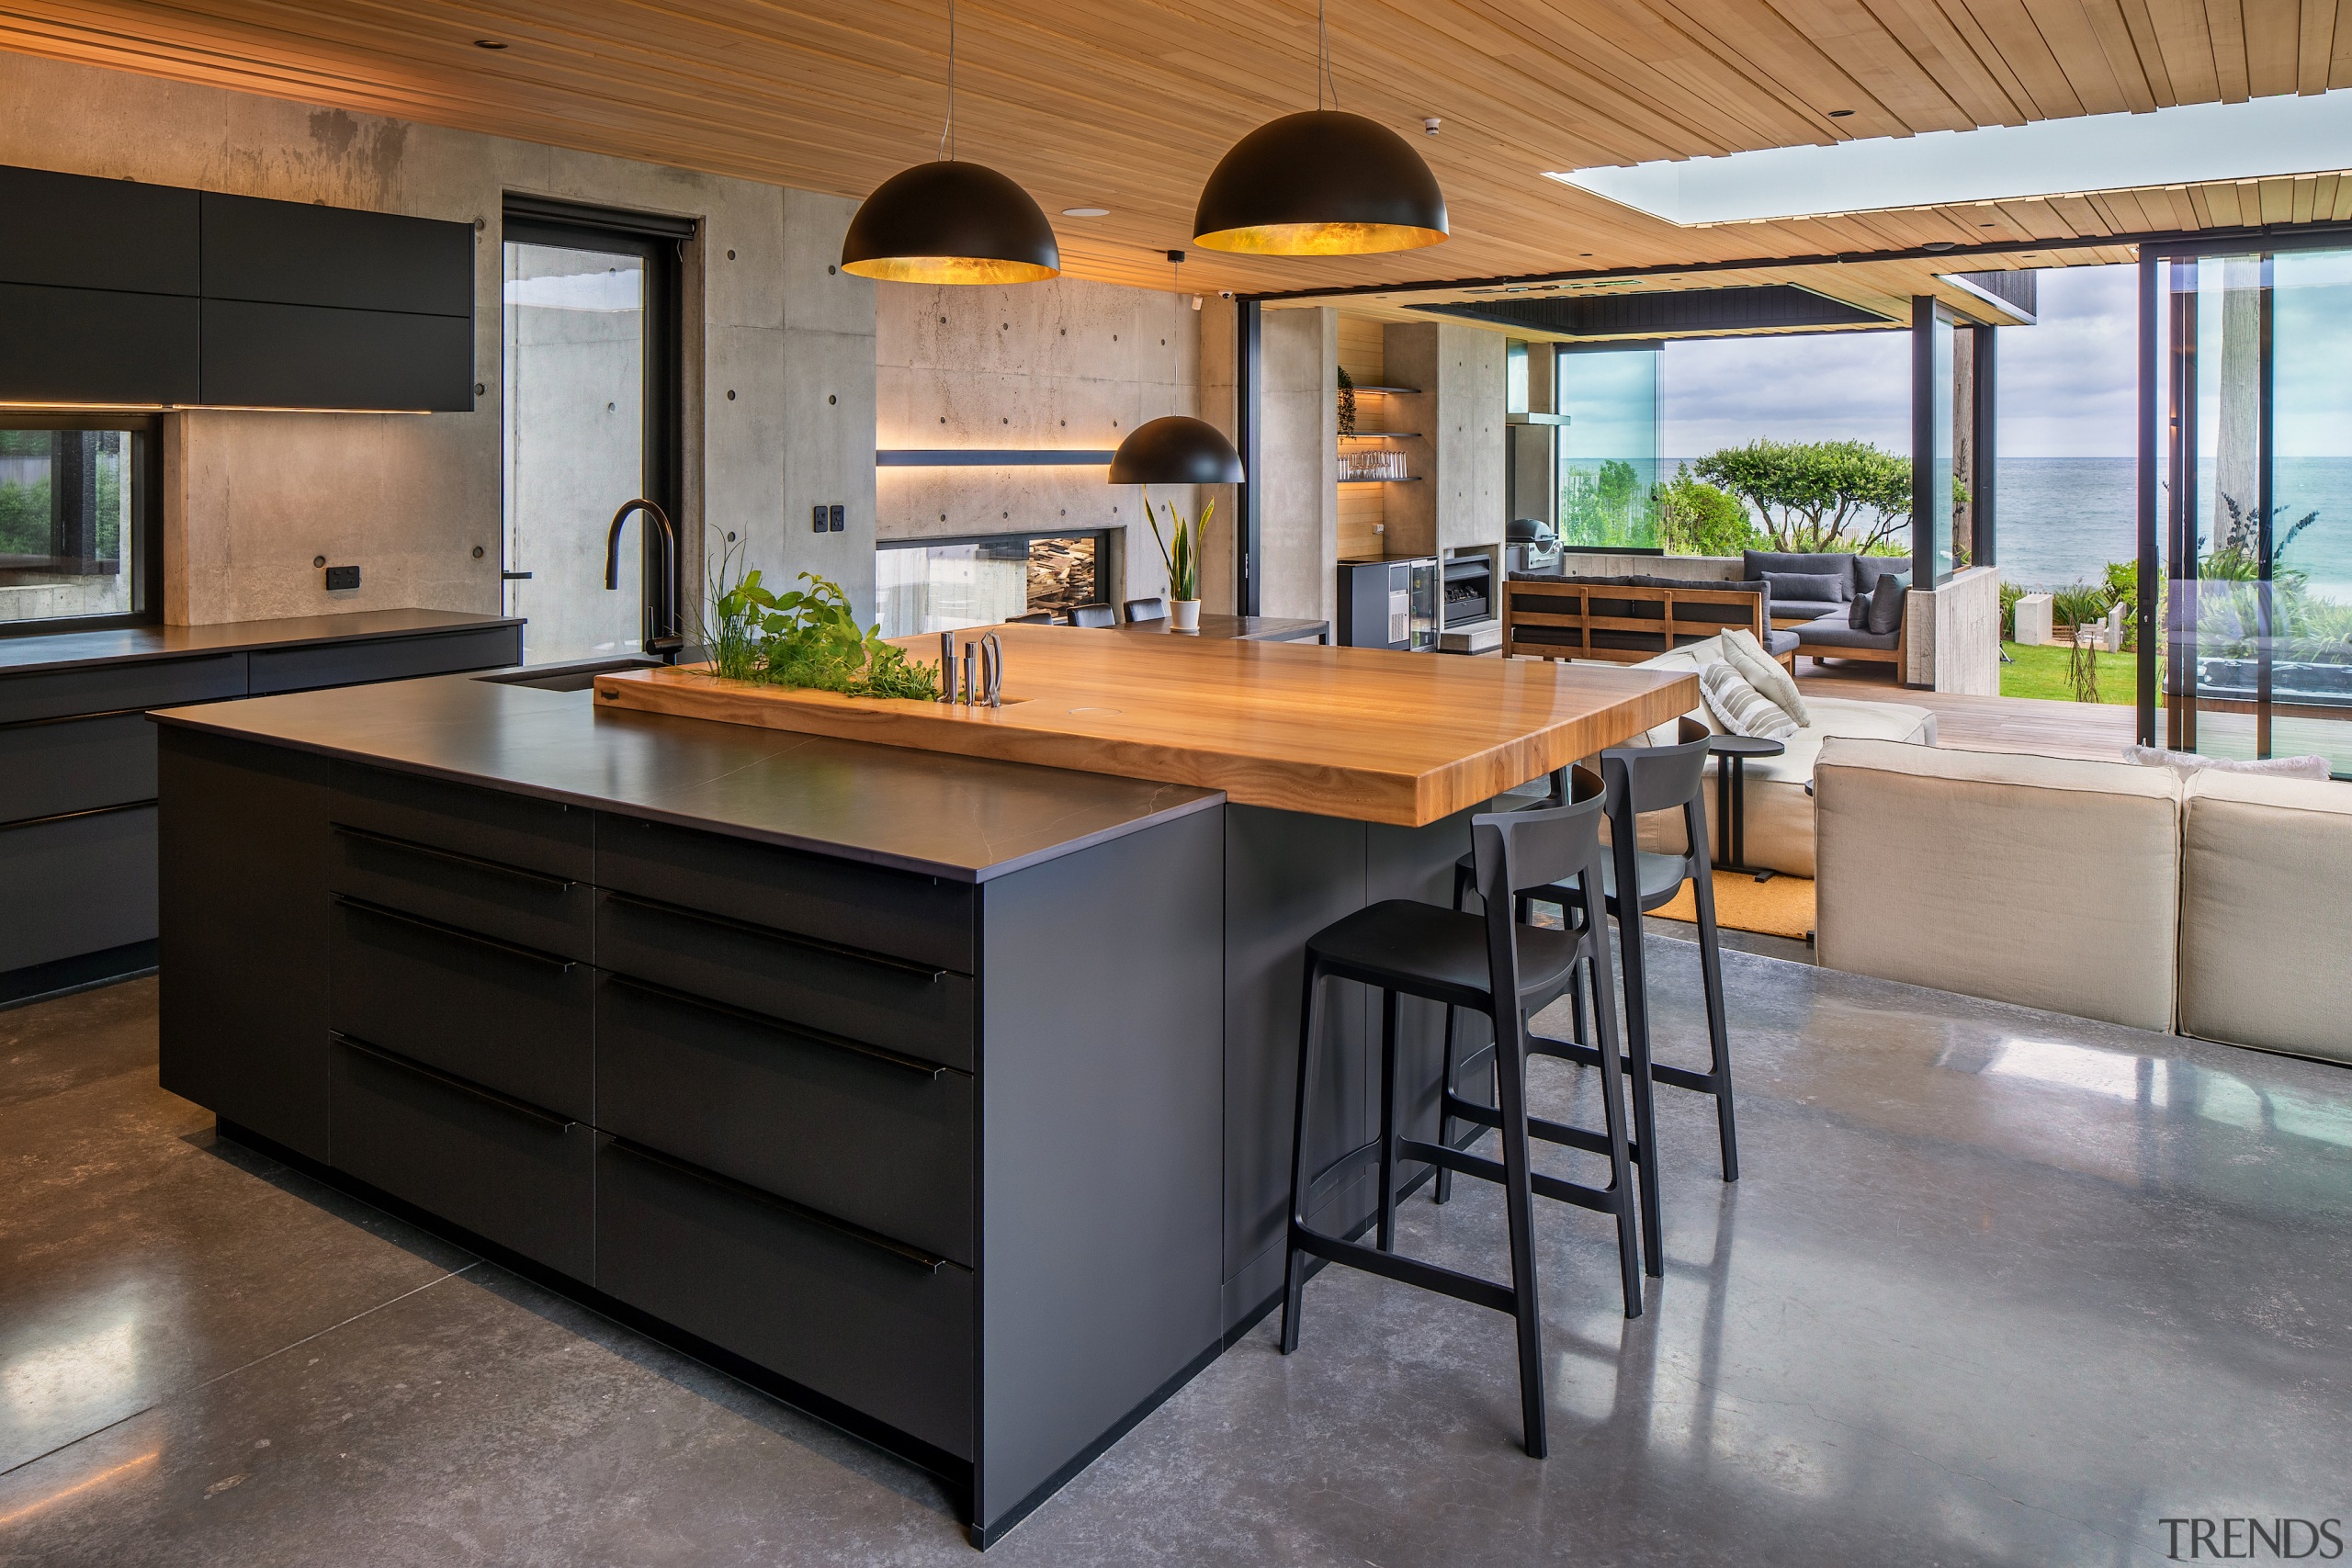 The timber benchtop overhangs on two sides to 